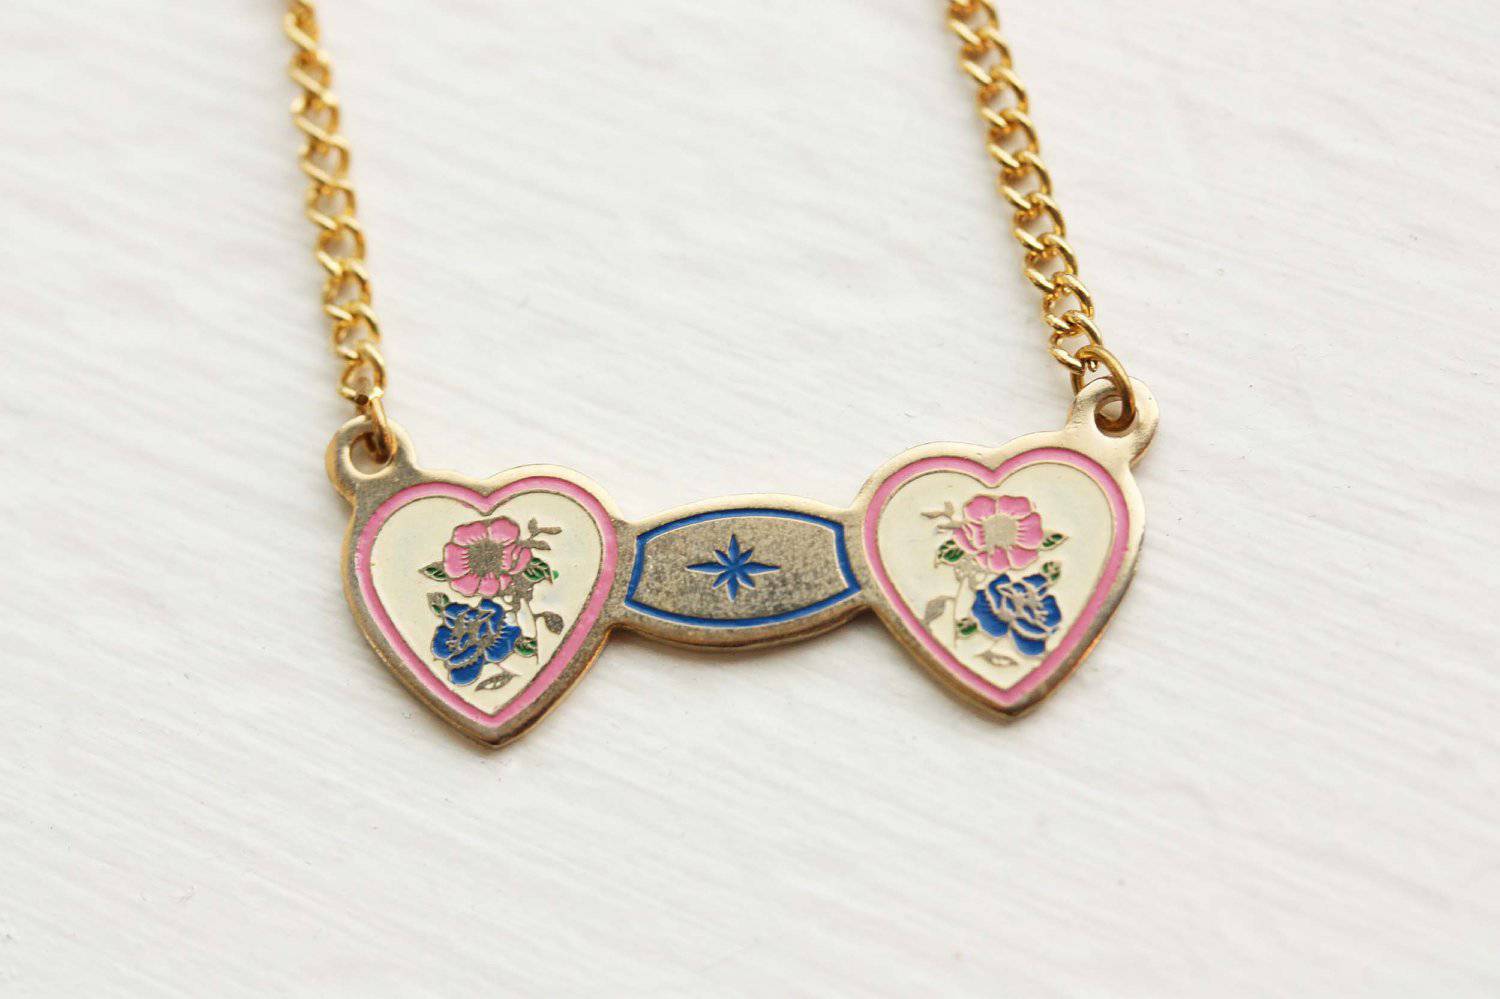 HEART ENAMEL NECKLACE - Out of the Blue